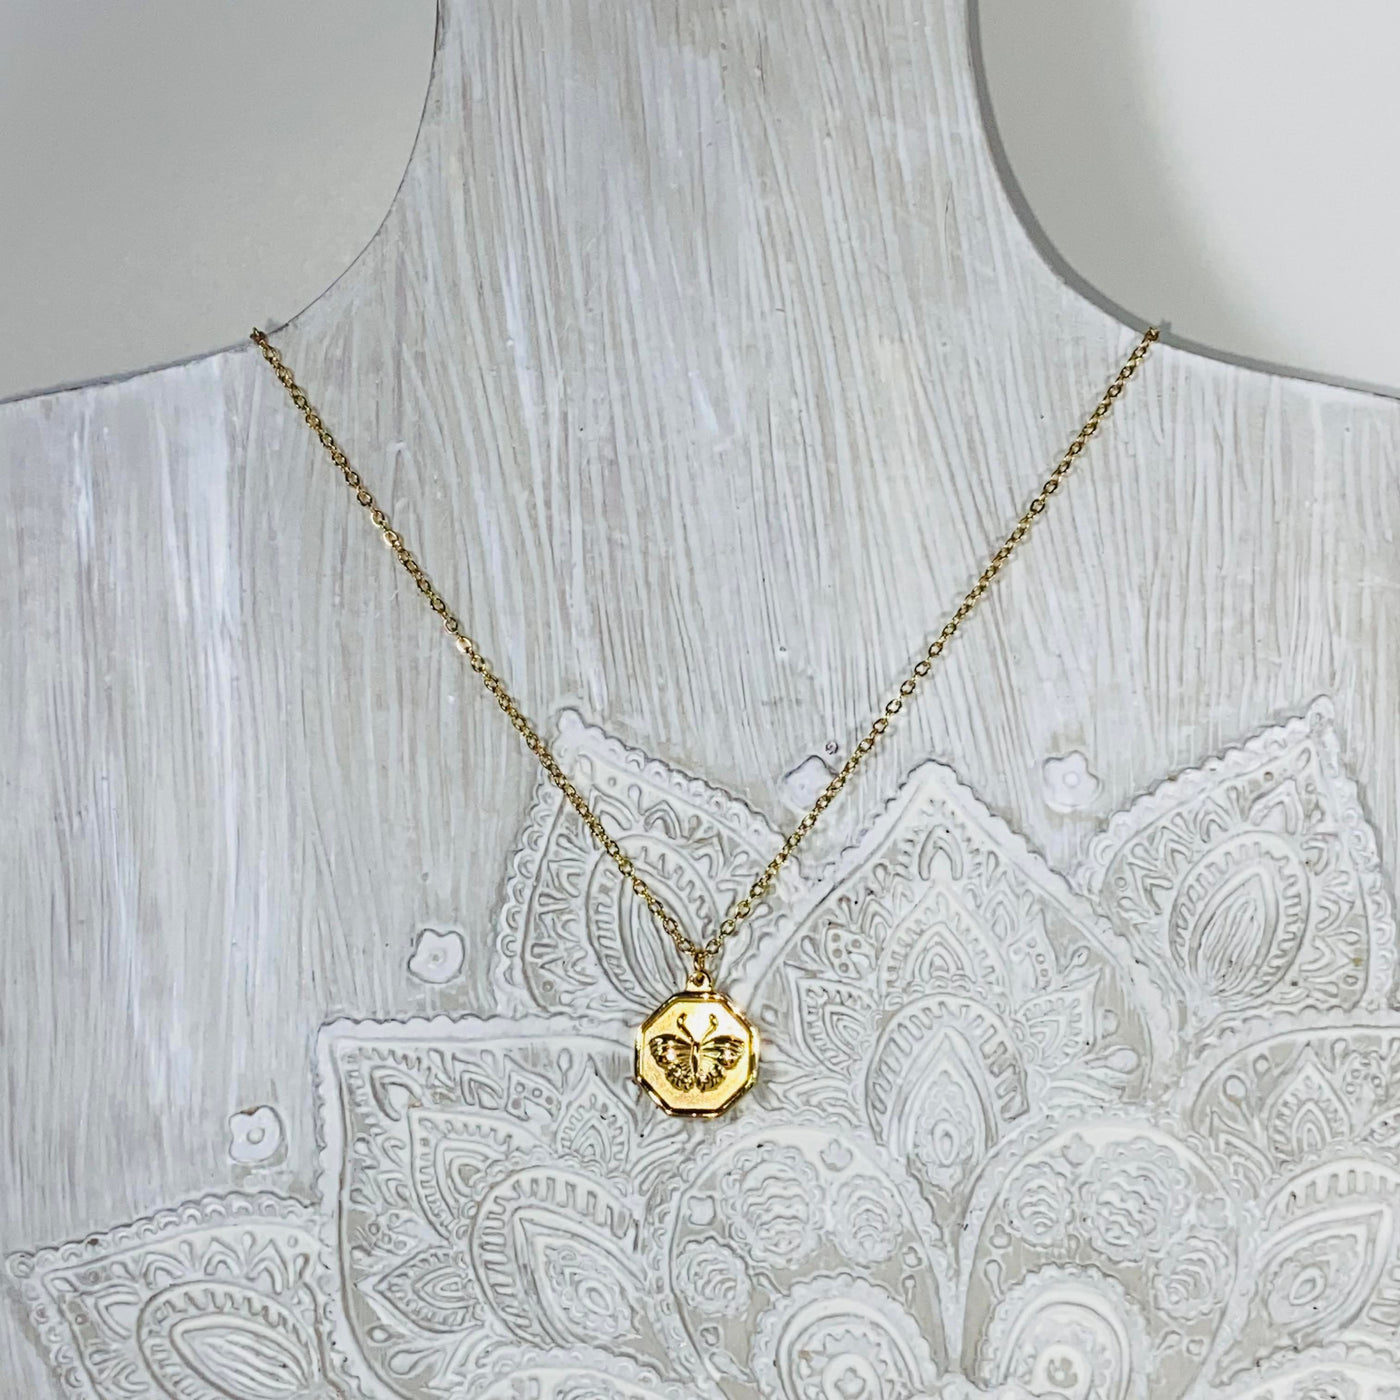 The Monarch Necklace